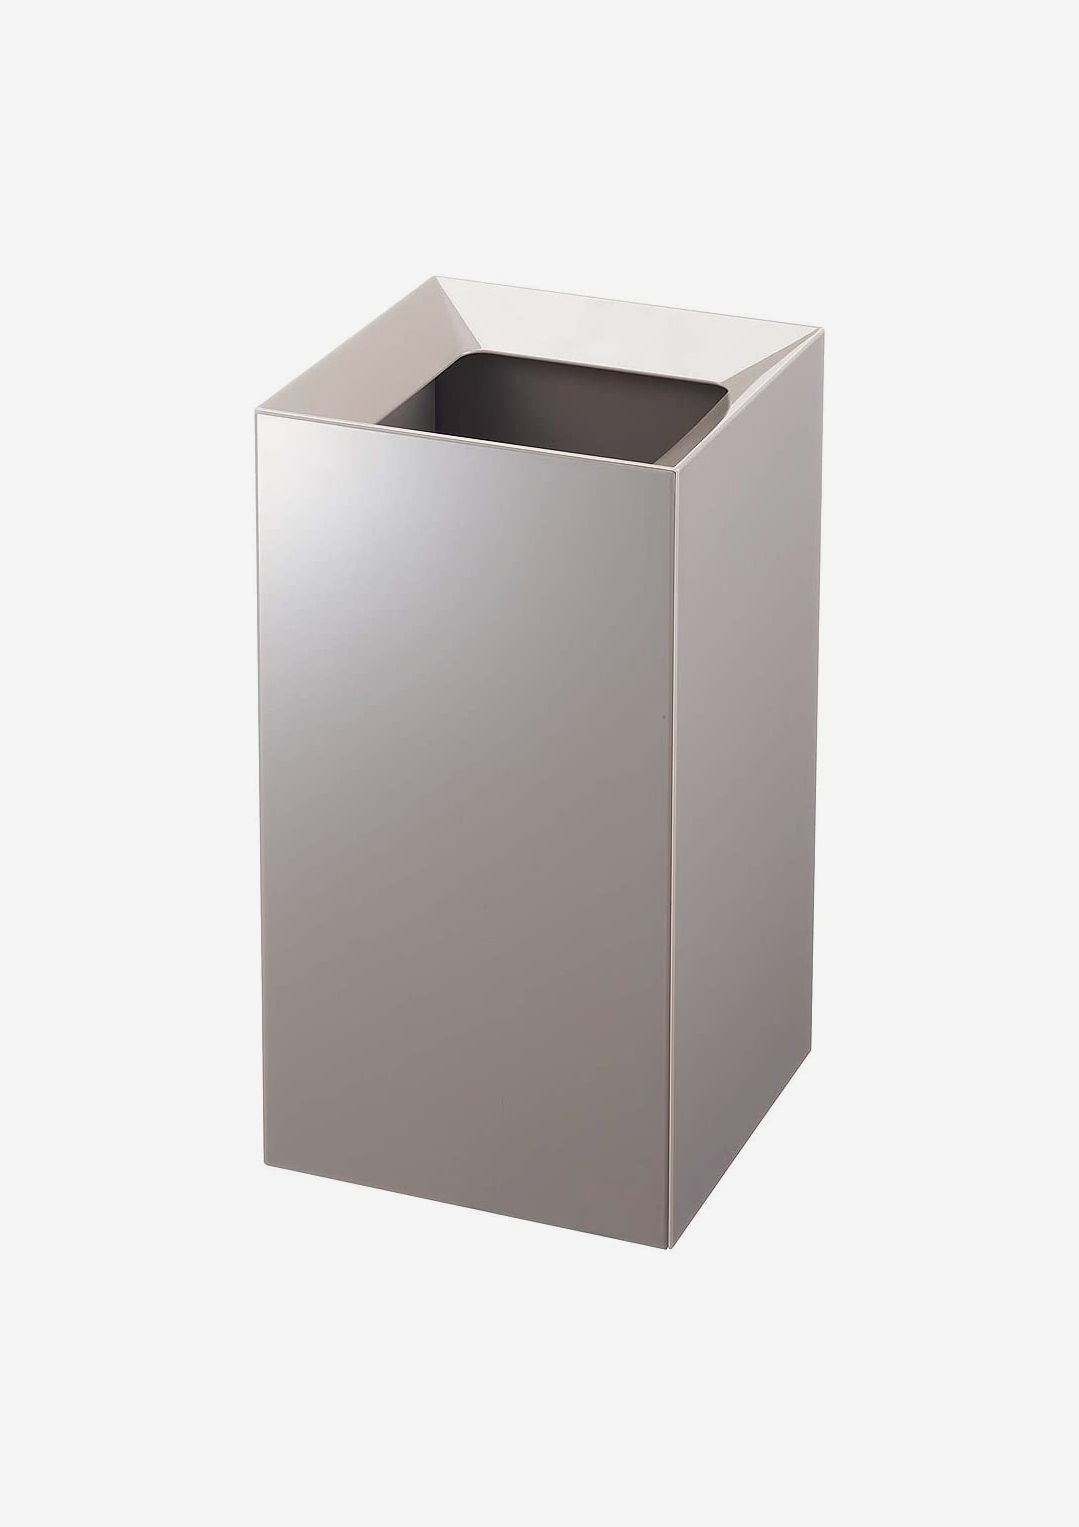 10 Best Trash Cans 2023